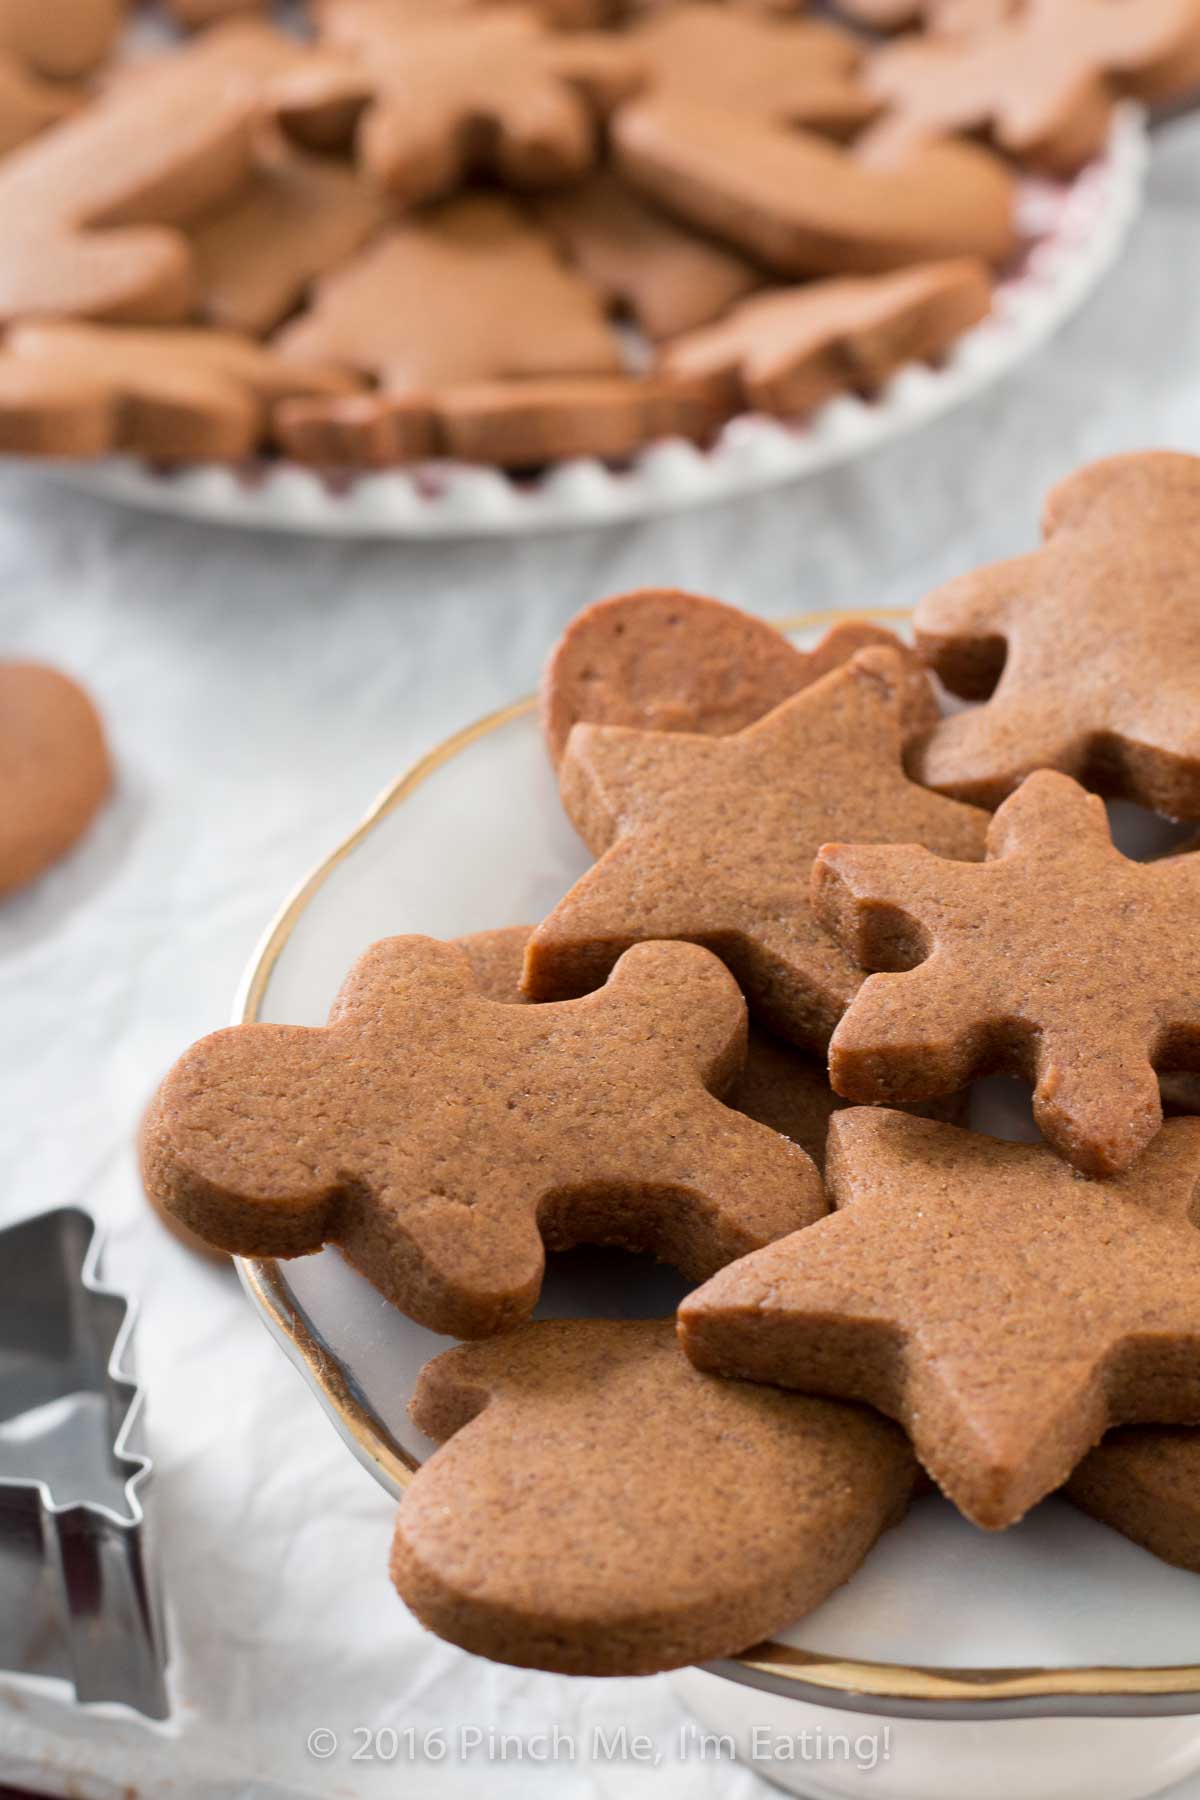 Get in the holiday spirit with some spicy, chewy gingerbread cookies! They keep their shape when cut with cookie cutters and they stay soft and delicious! They're the ultimate Christmas cookies.